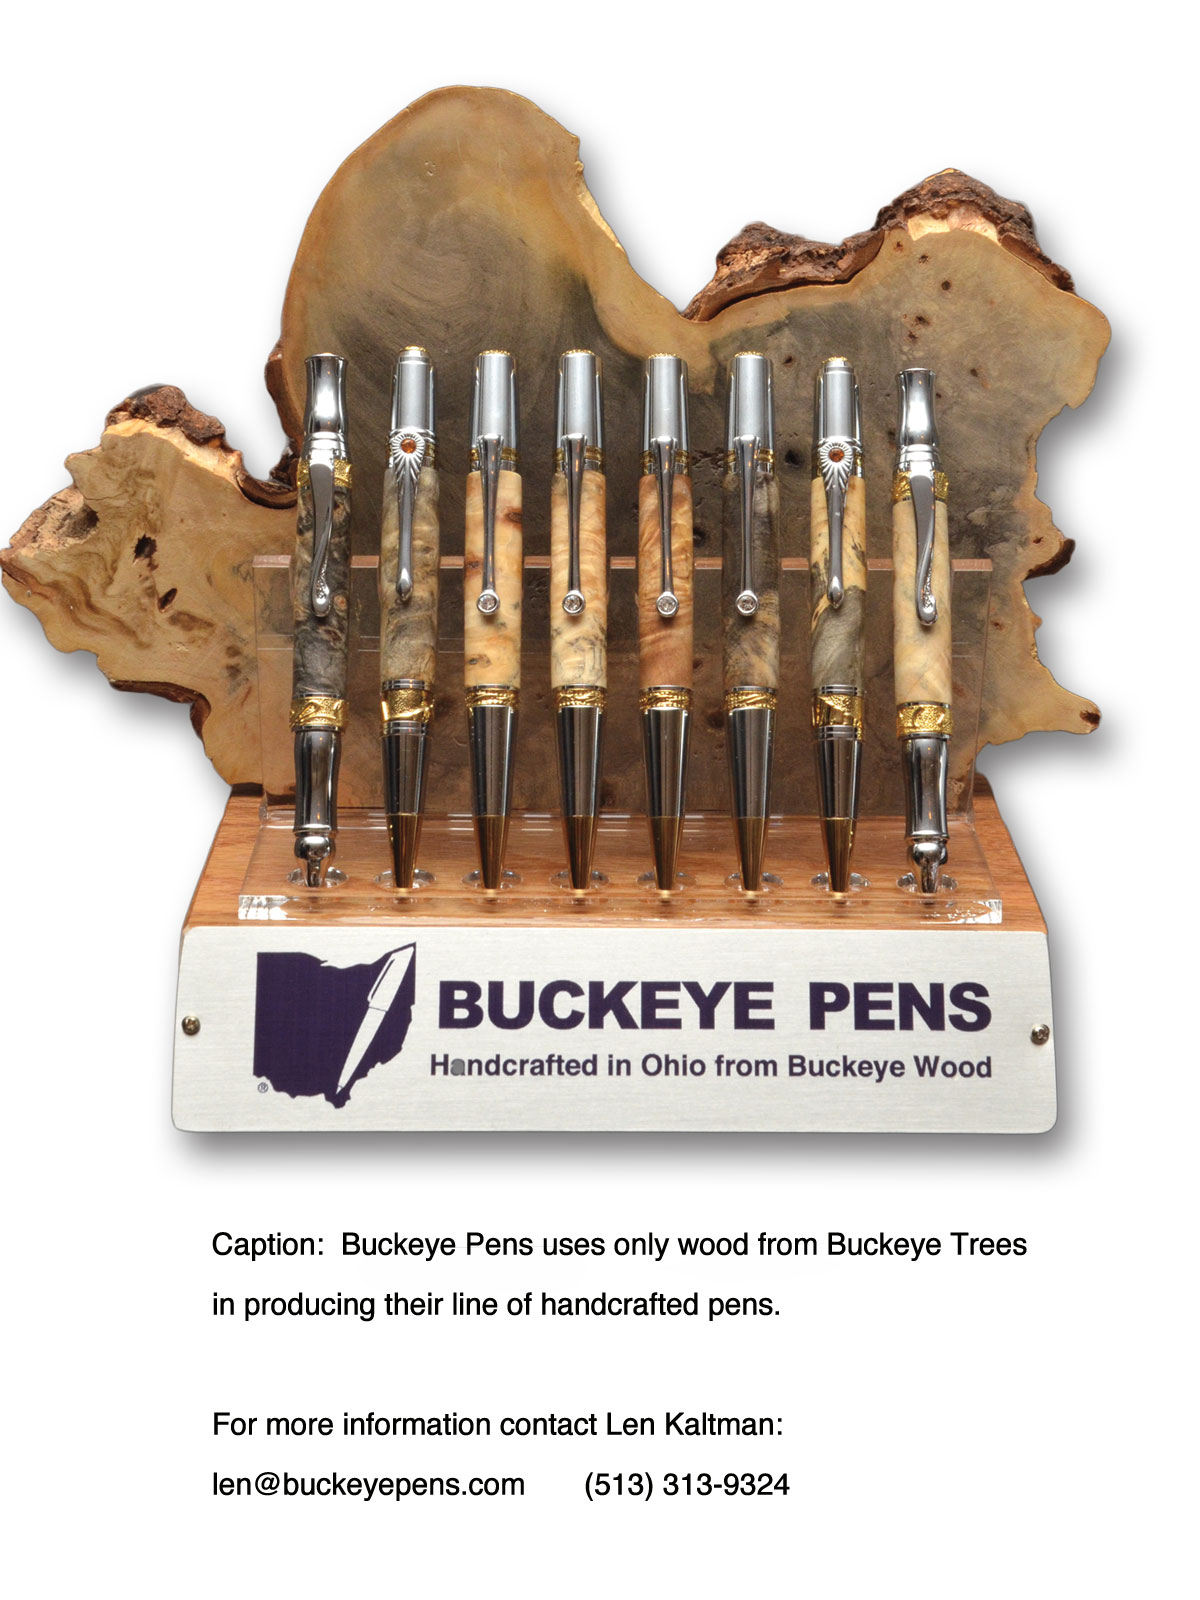 Ohio company uses wood from Buckeye Tree for their pens.